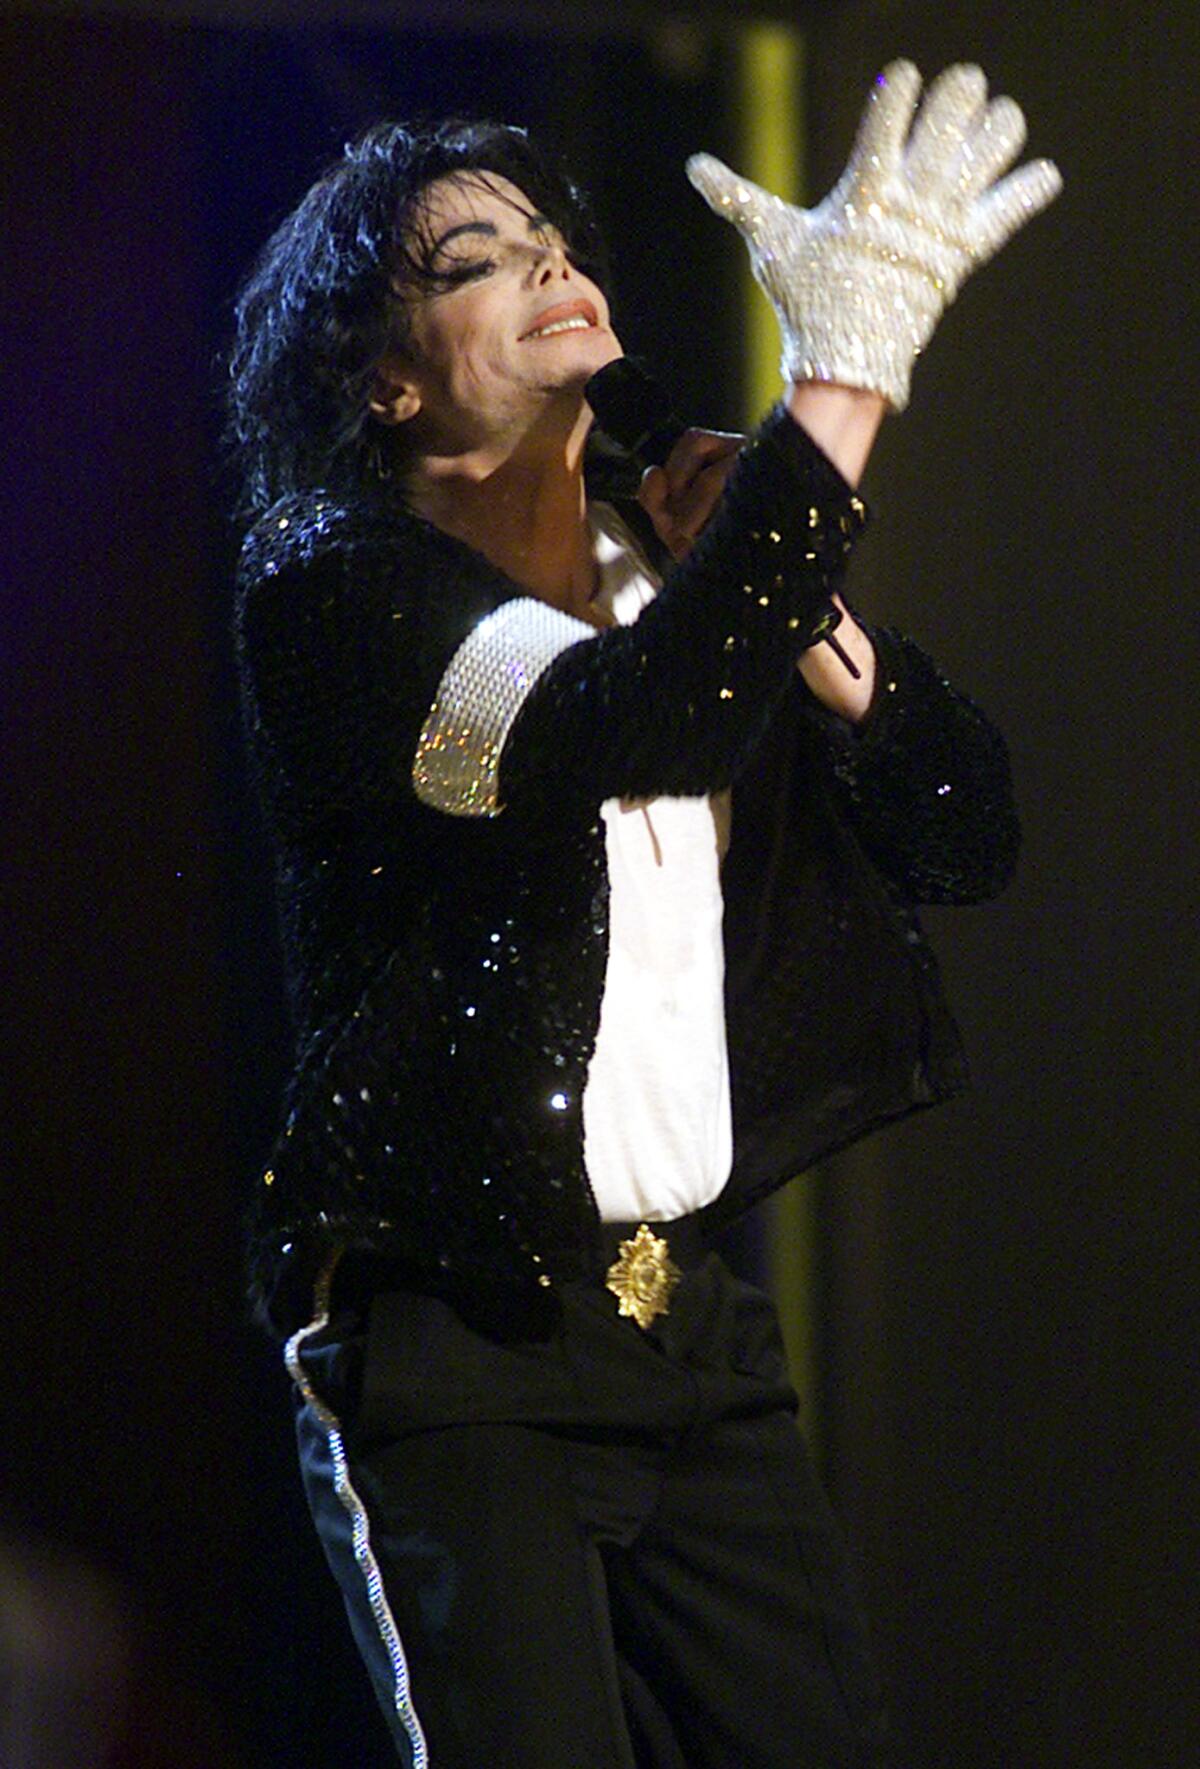 The musical parody 'For the Love of a Glove' gives a voice to Michael Jackson's iconic accessory.